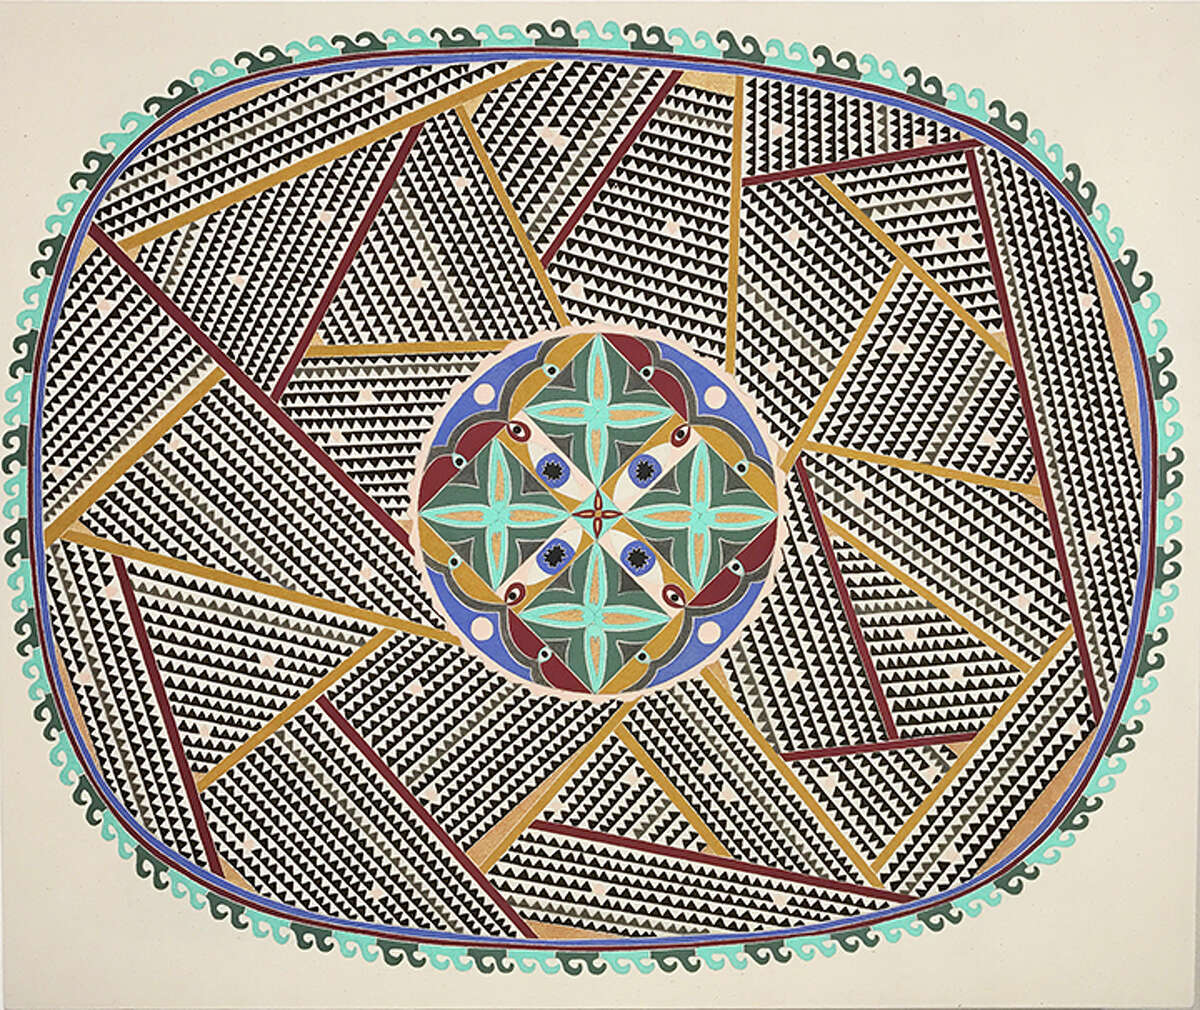 "Green Center Shield" is among the paintings in Catherine Colangelo's solo show "Talismanic," on view at Cindy Lisica Gallery through Feb. 4.